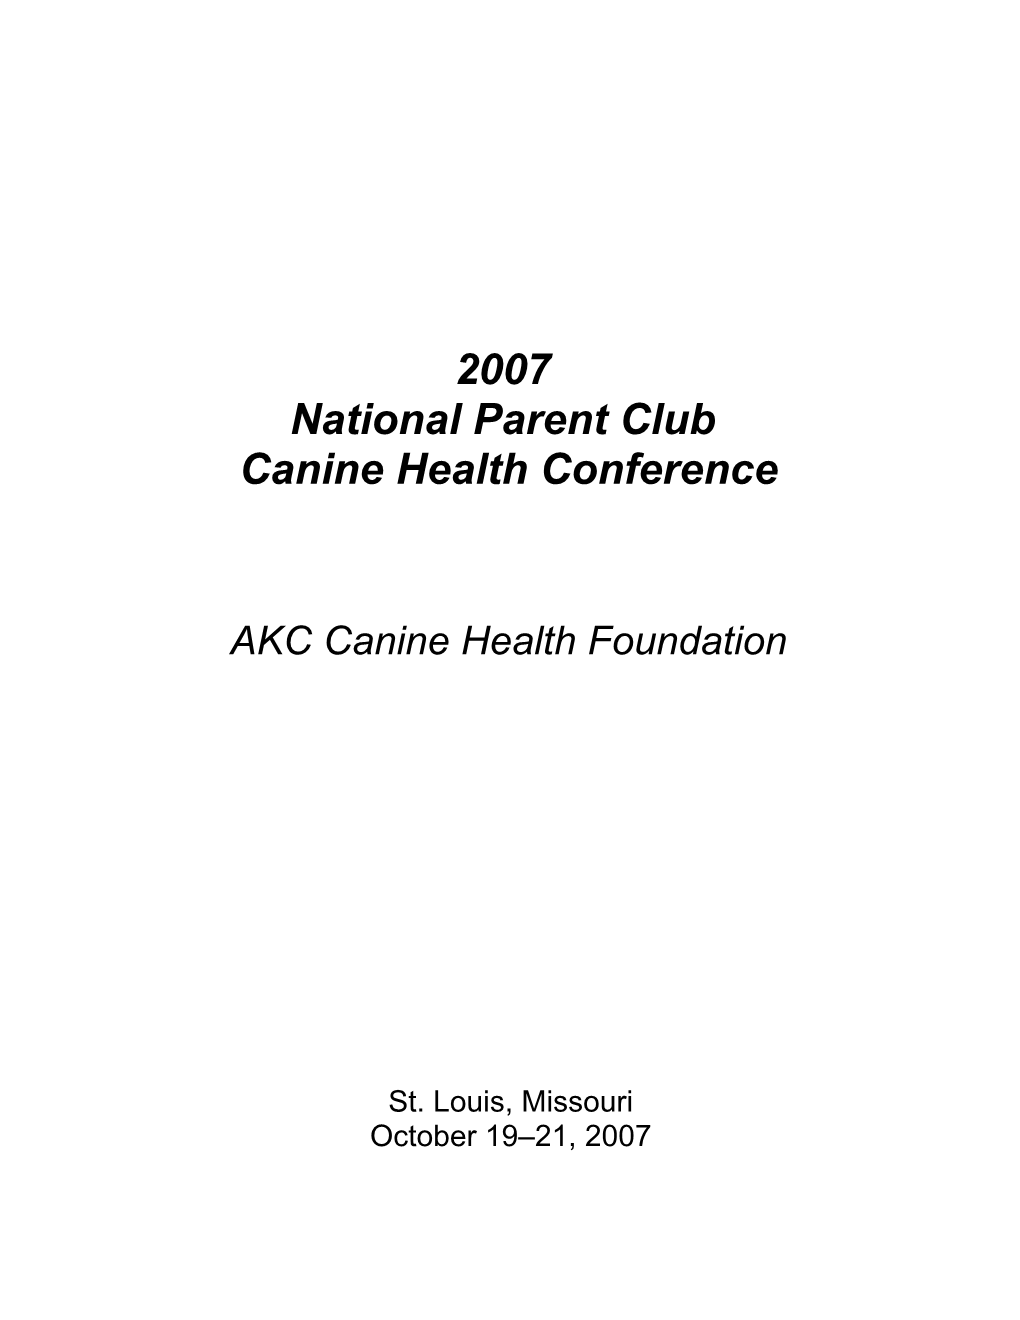 Canine Health Conference